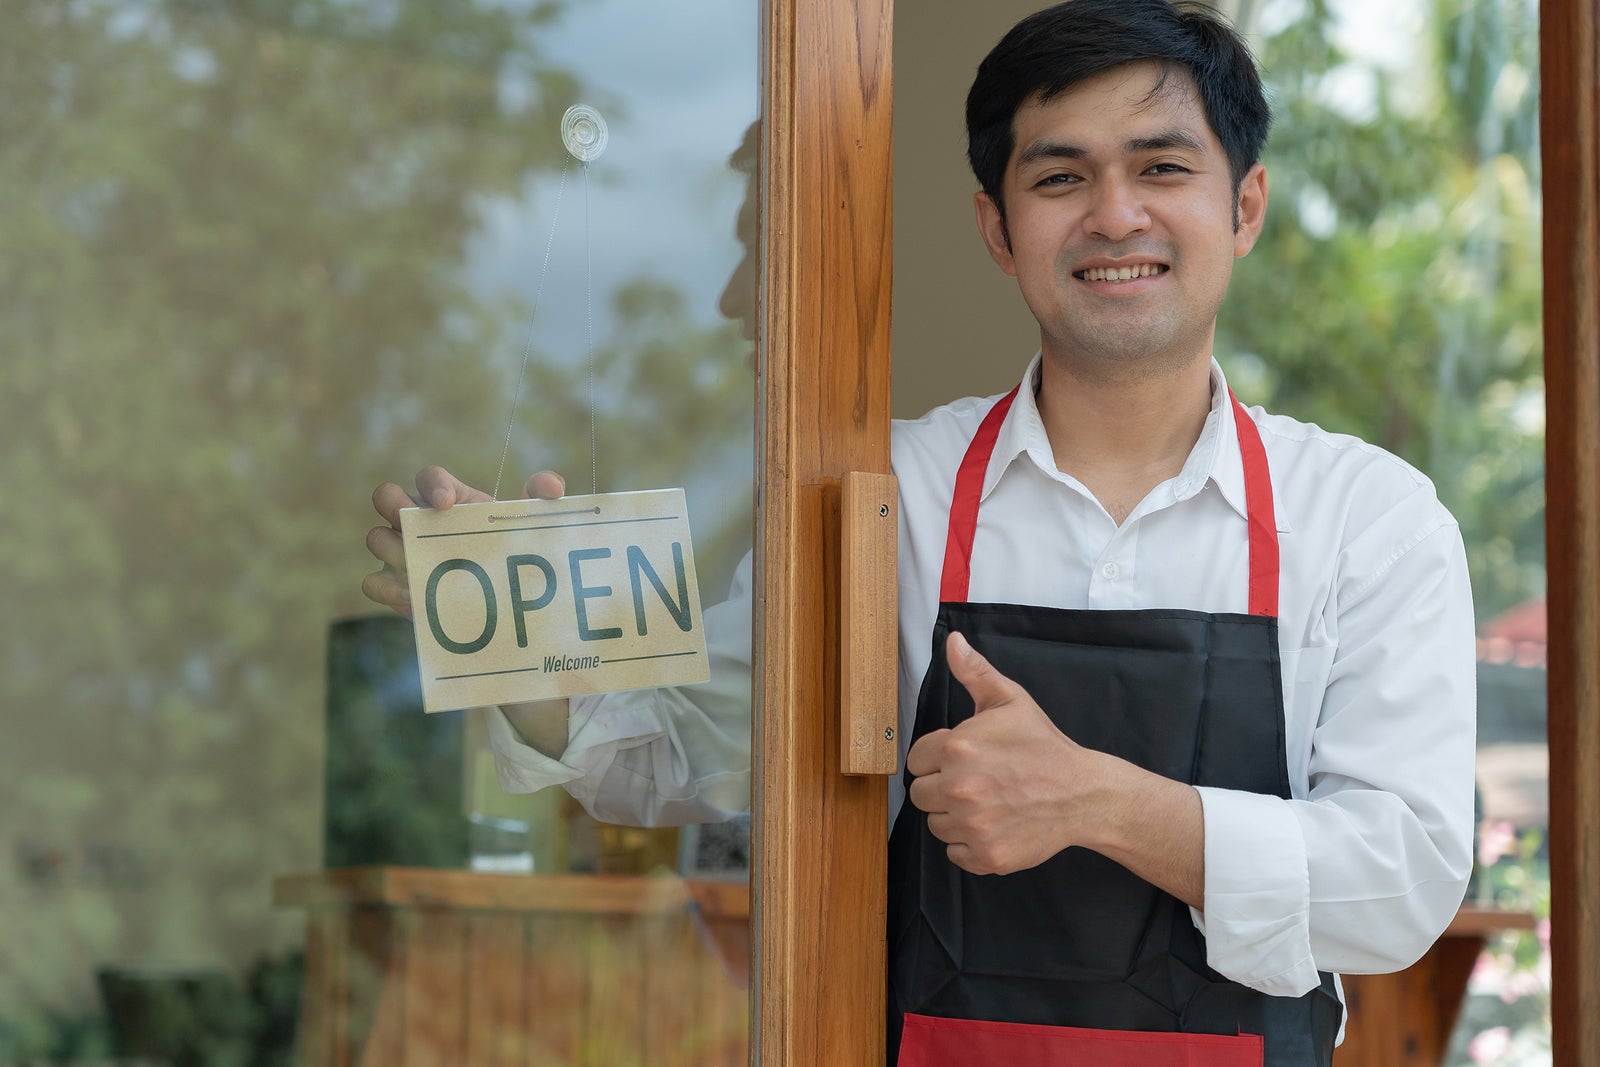 Business owner thumbs up to show his readiness to welcome customers. waitress man turning on open sign board on glass door in modern cafe coffee shop. New normal, small business, cafe, life style.